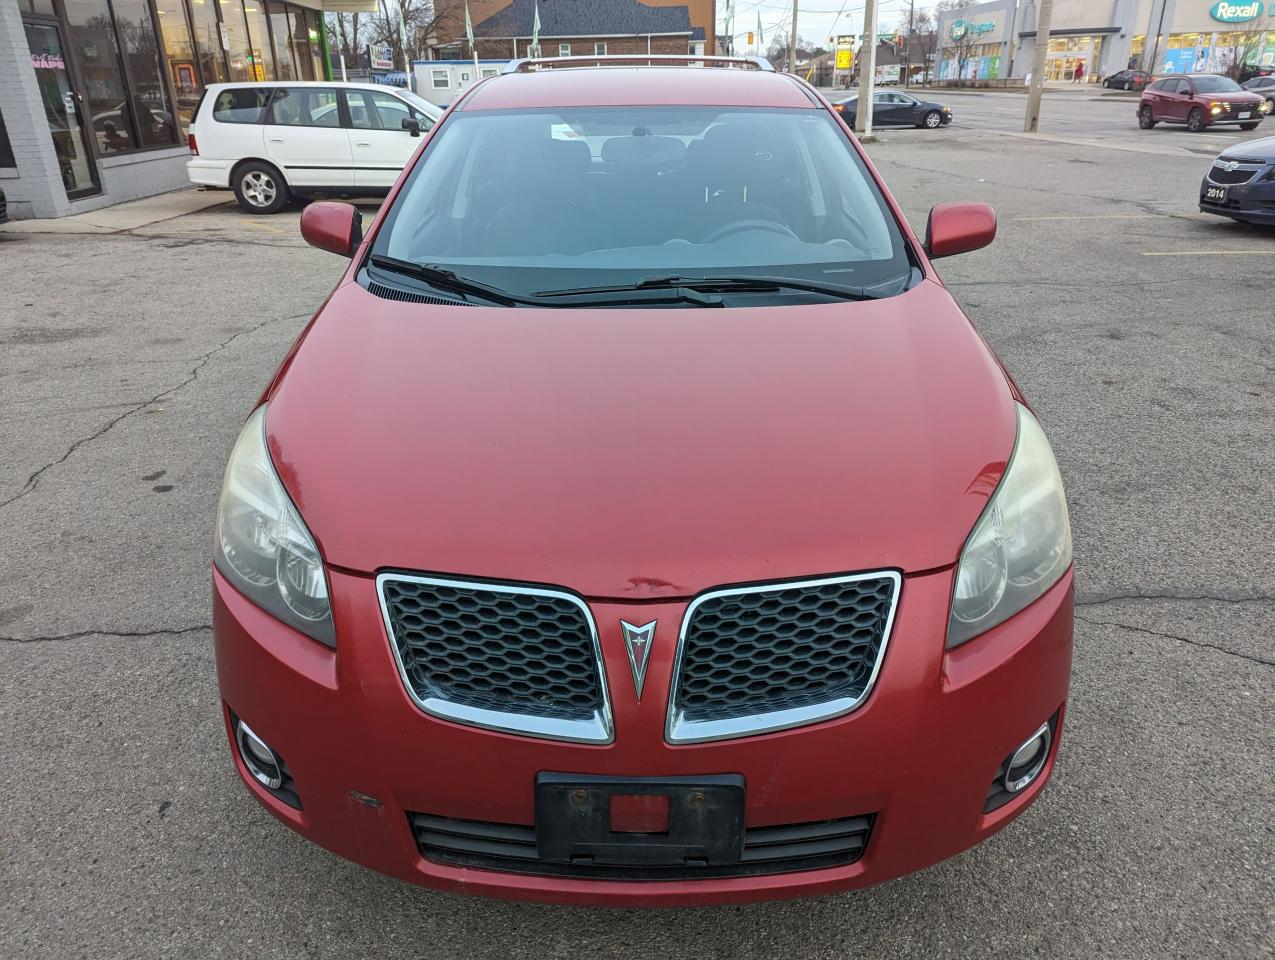 2009 Pontiac Vibe AWD *Drives Excellent/Free Winter Tires On Rims* - Photo #15